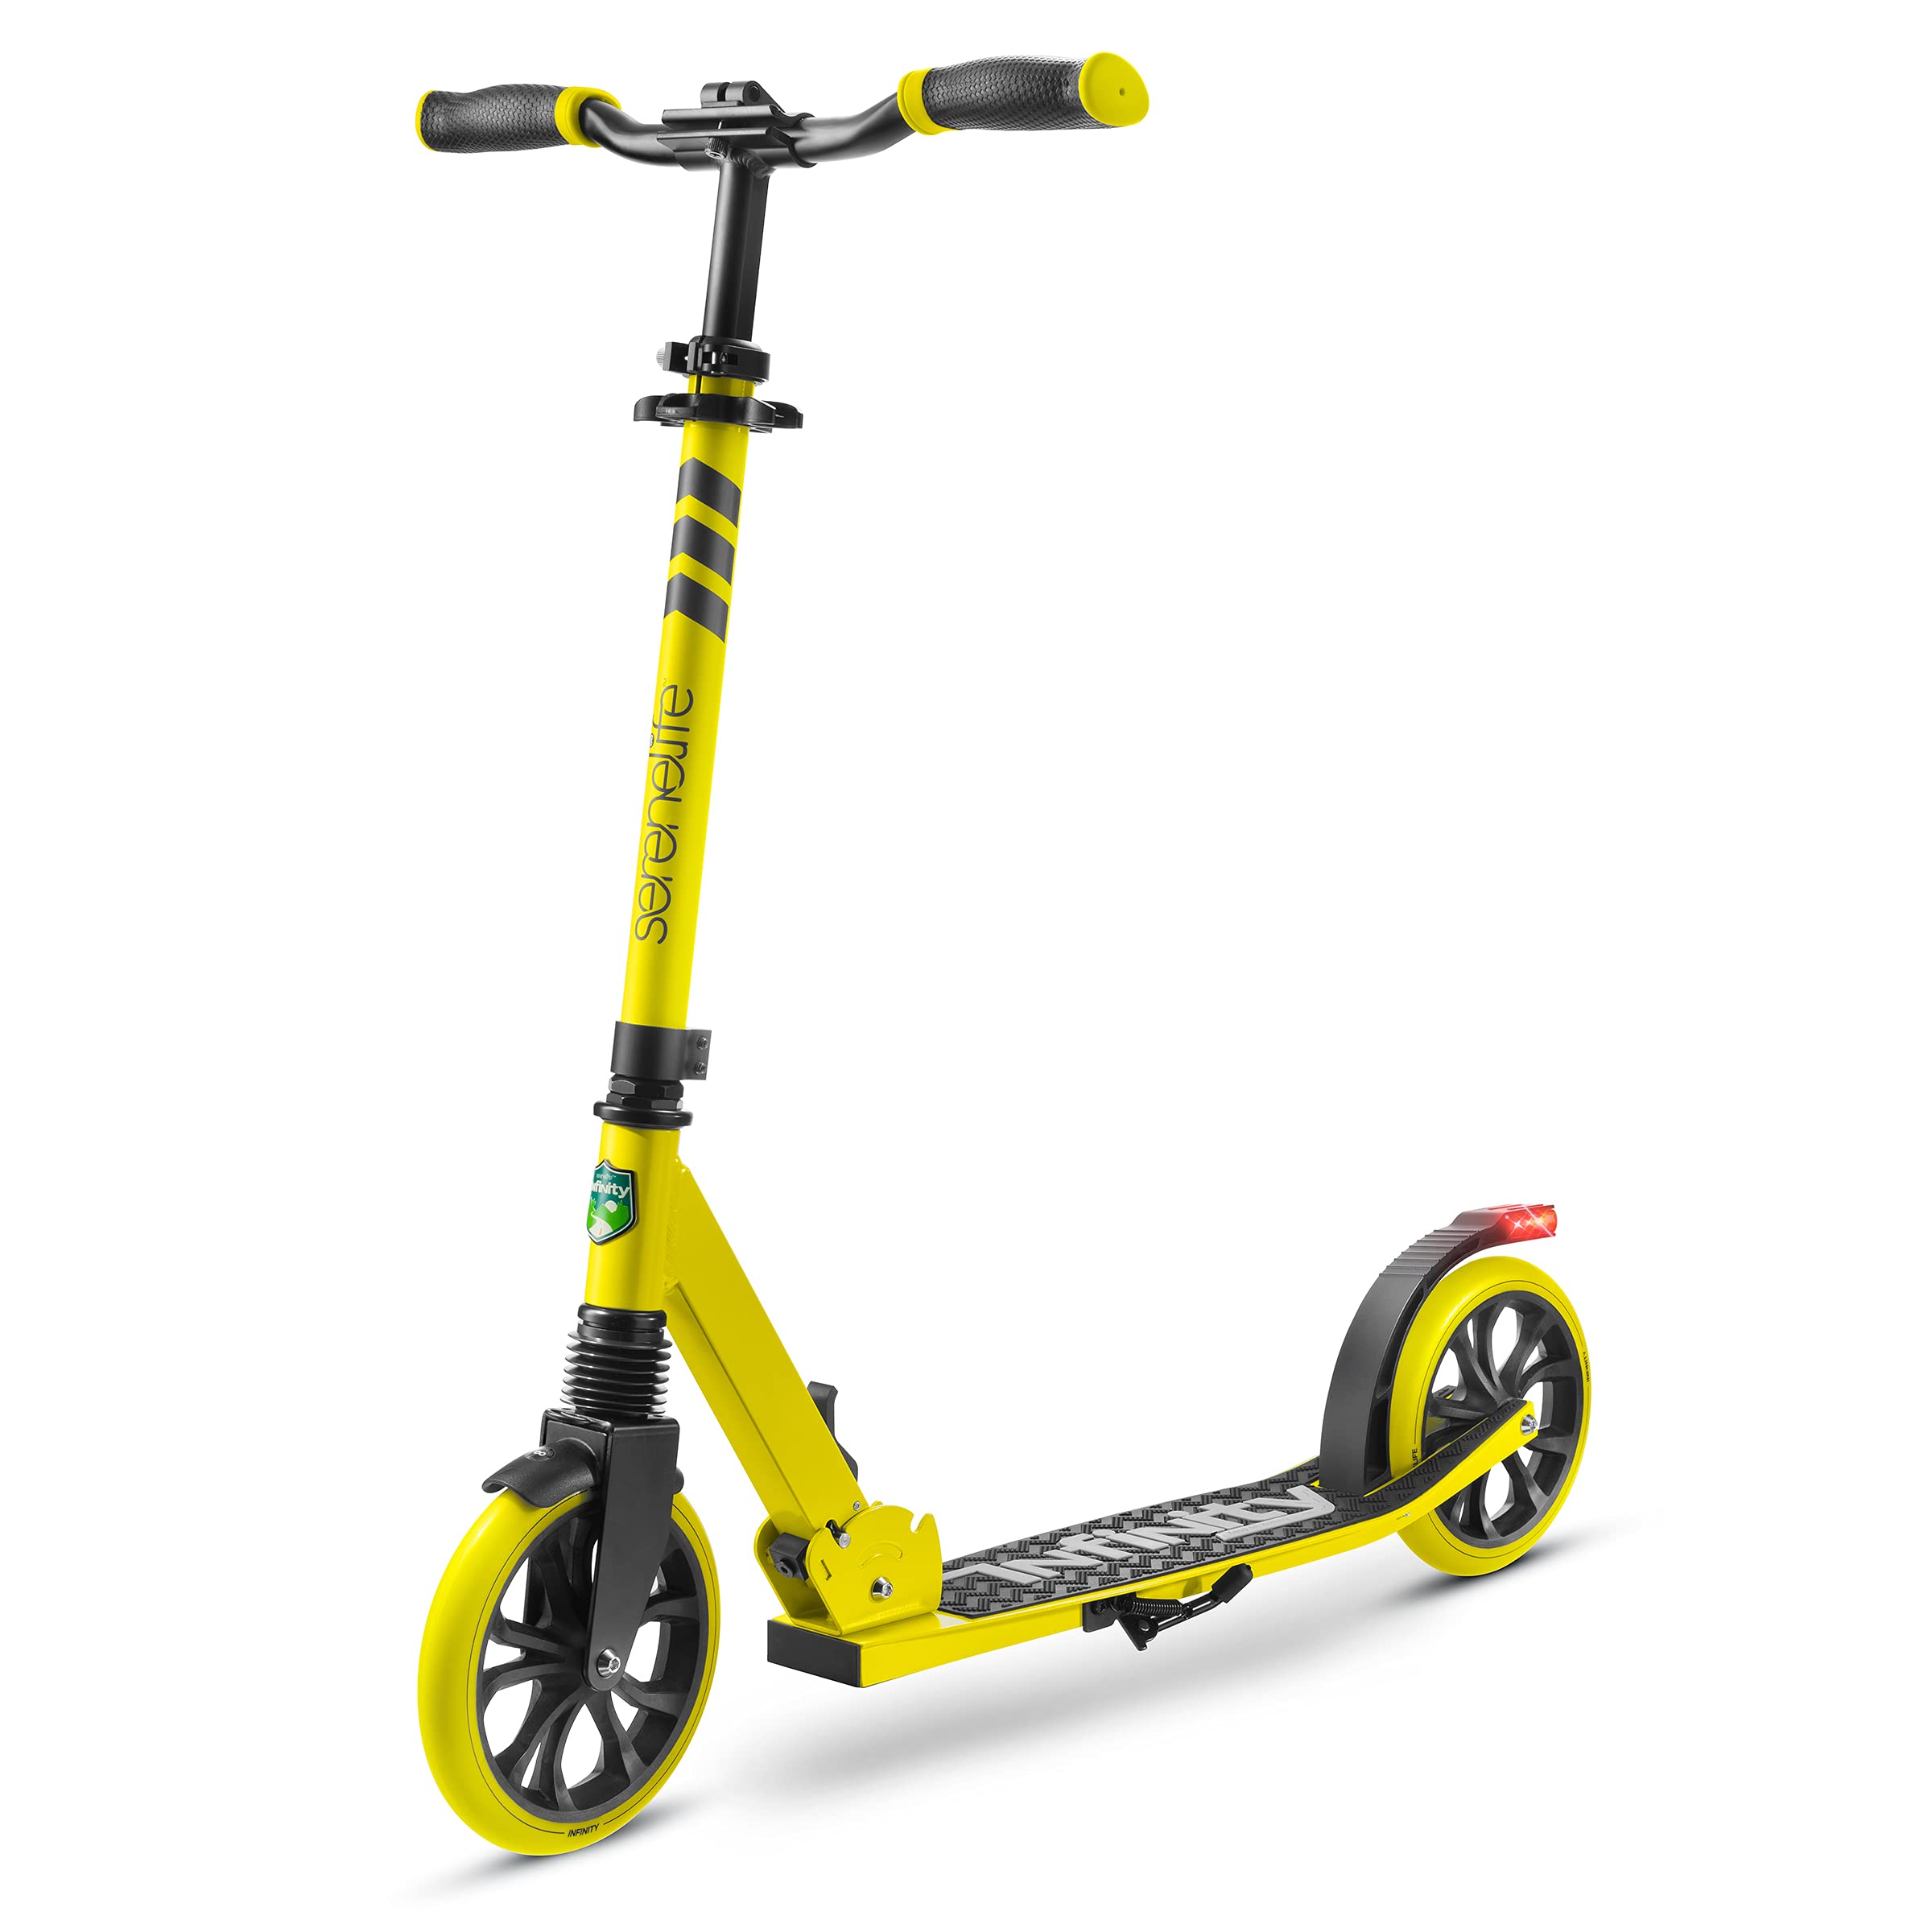 SereneLife Foldable Kick Scooter - Stand Kick Scooter for Teens and Adults with Rubber grip at Tip, Alloy Deck, Adjustable T-Bar